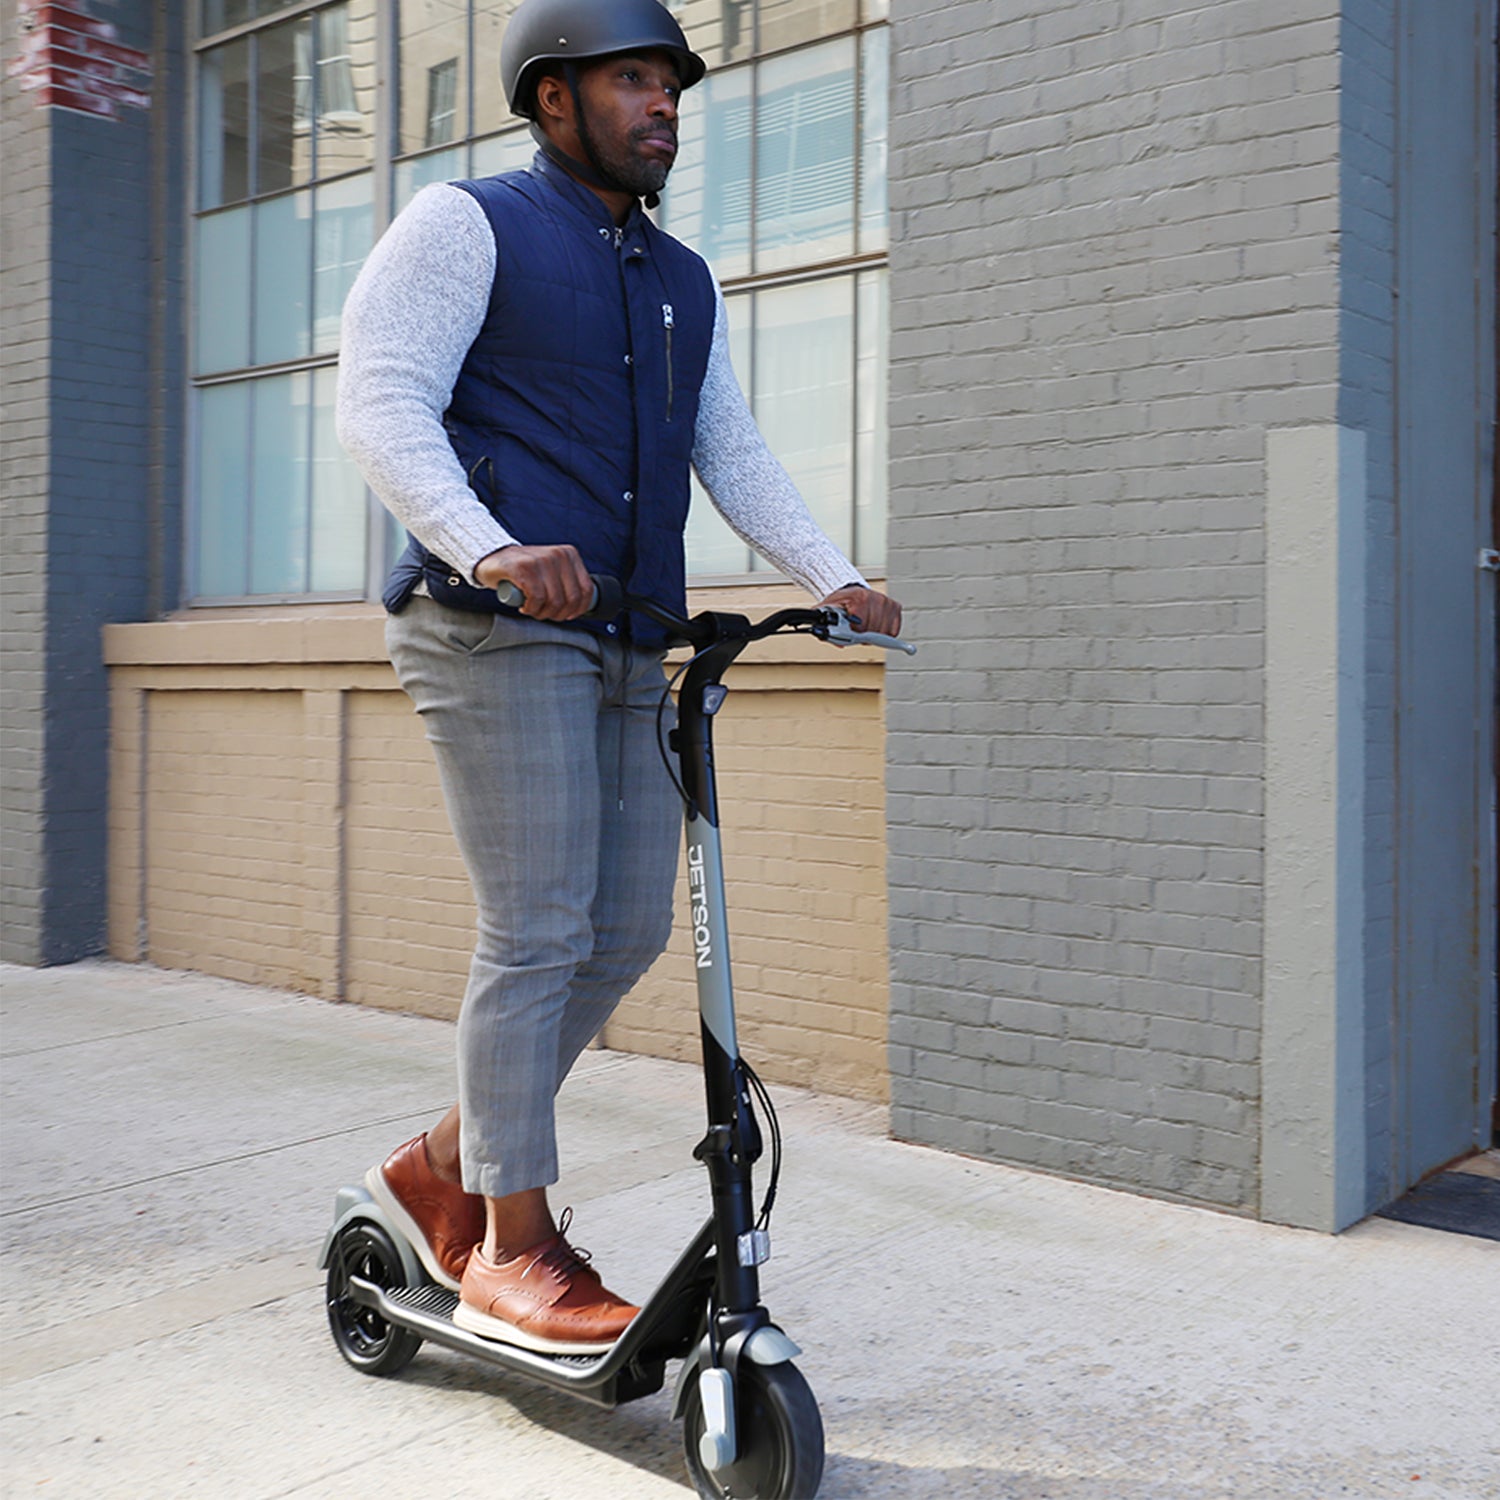 person in a helmet riding eris pro electric scooter